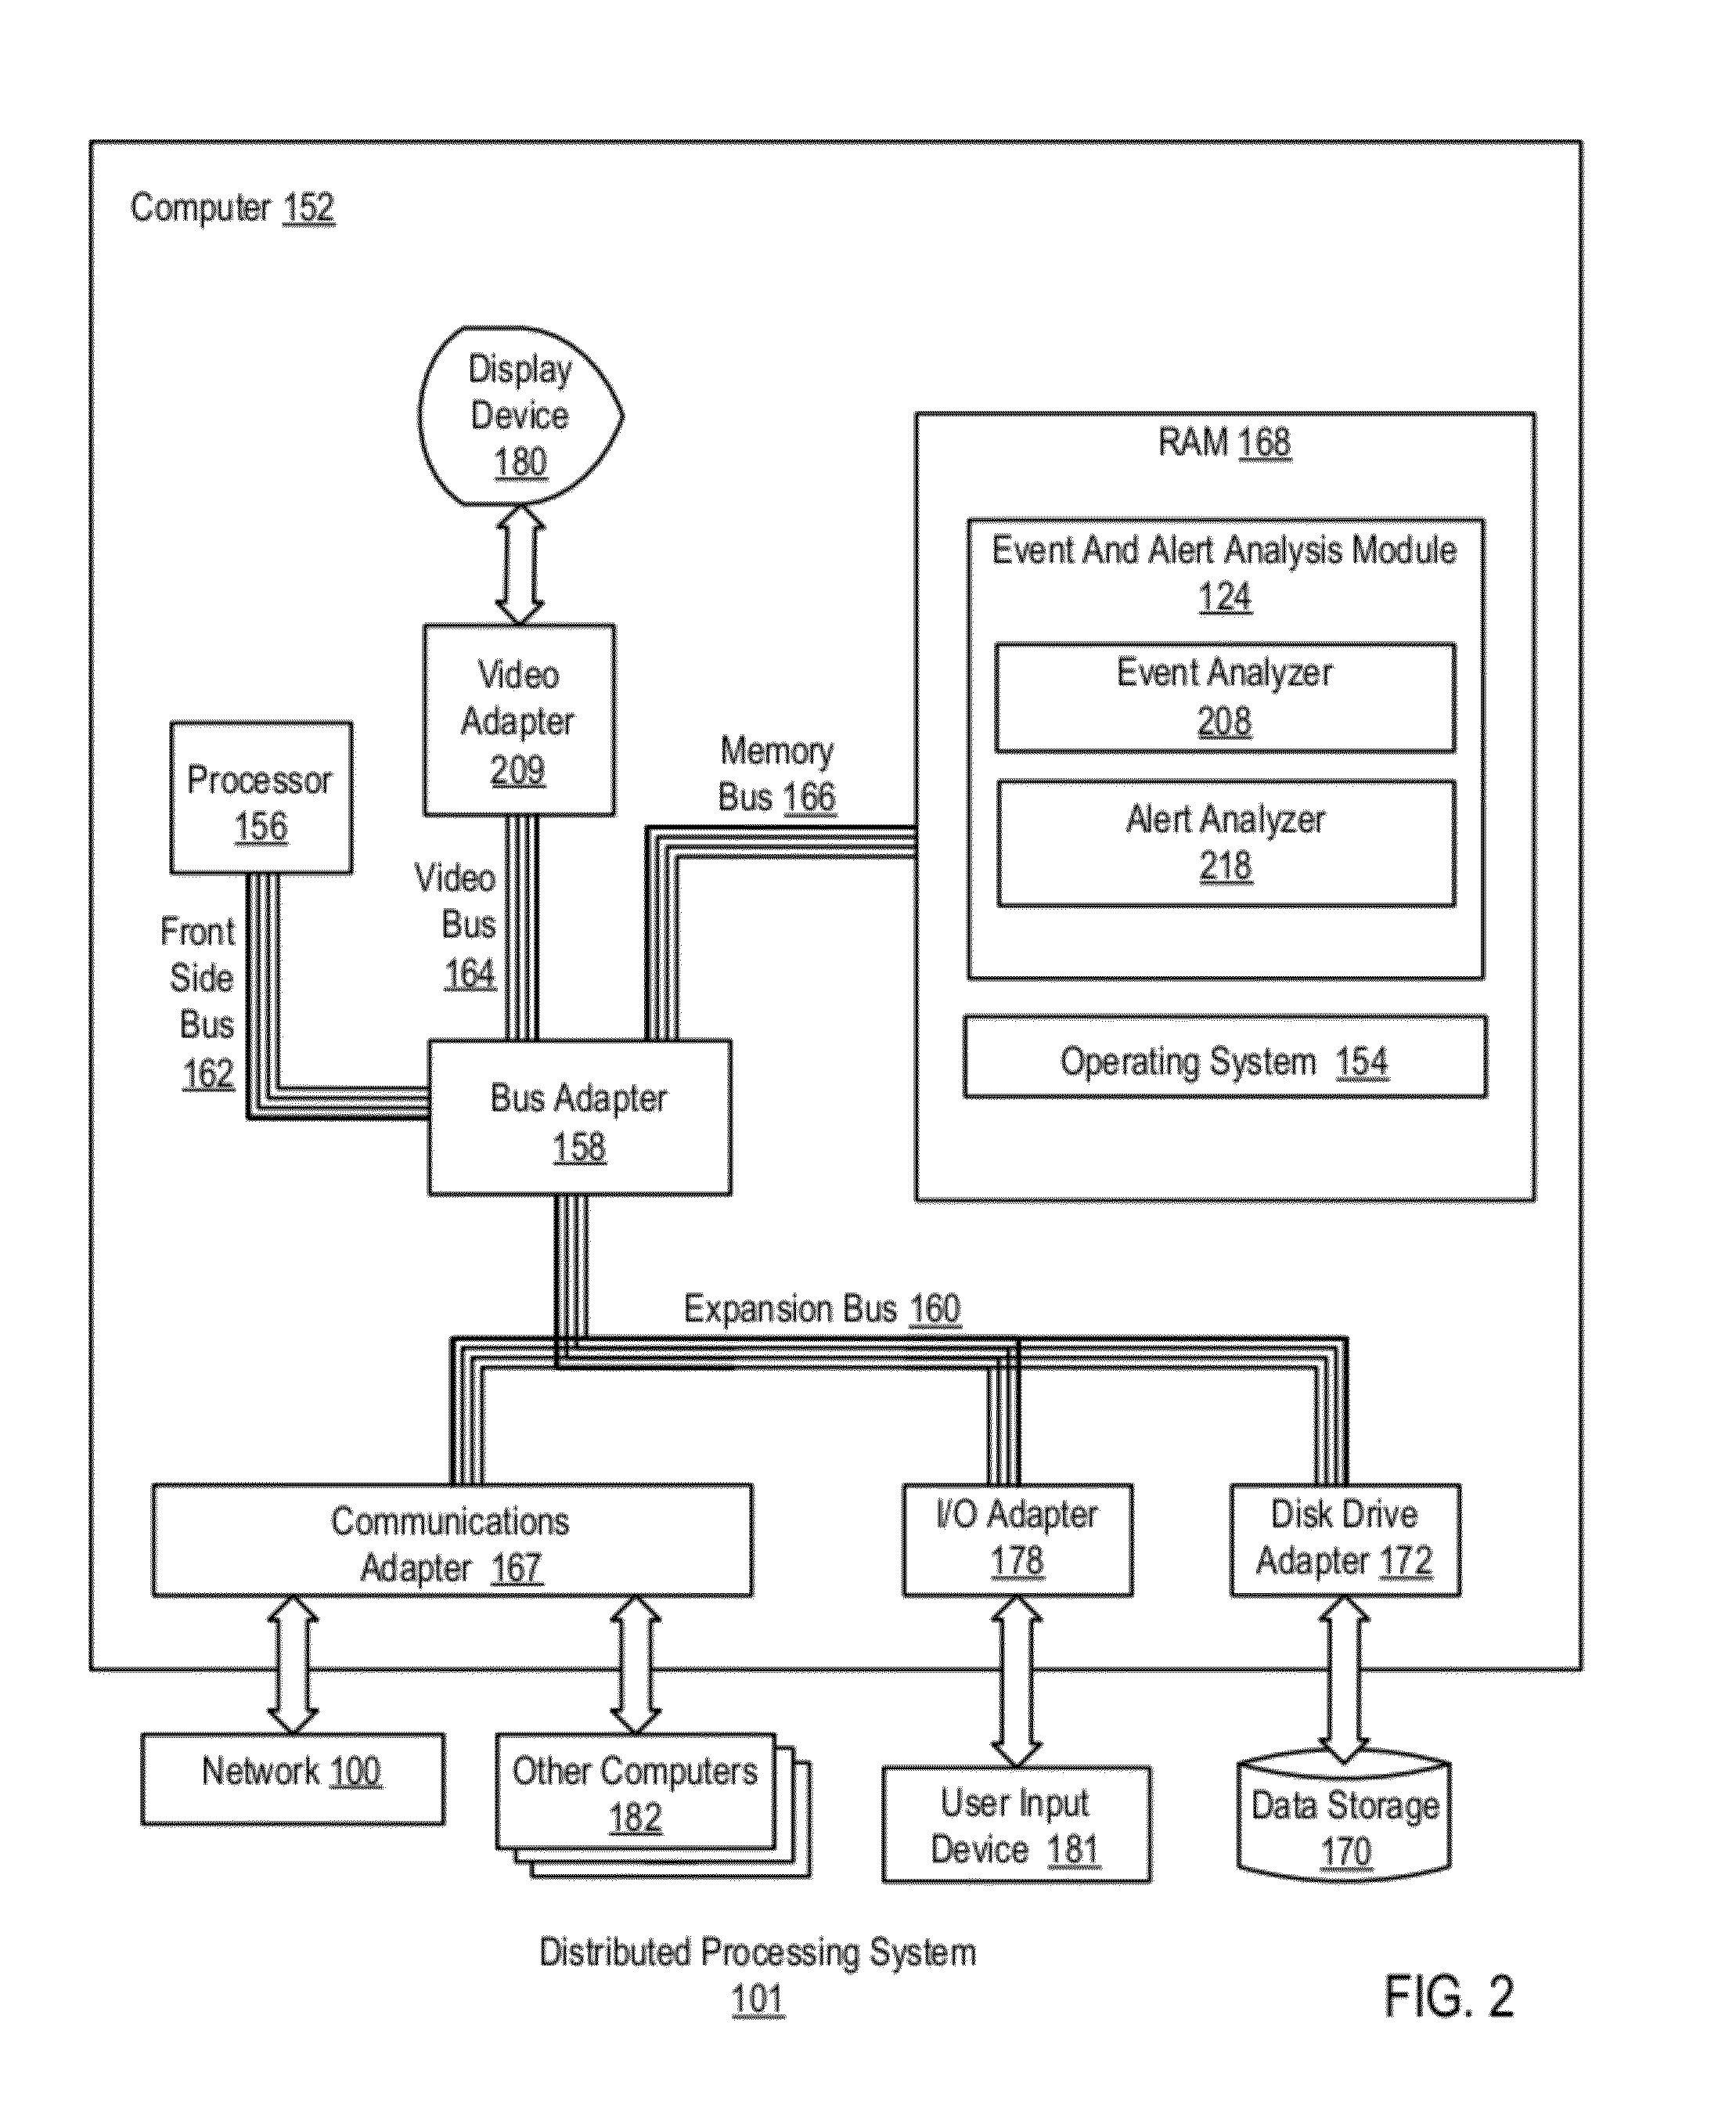 Relevant Alert Delivery With Event And Alert Suppression In A Distributed Processing System